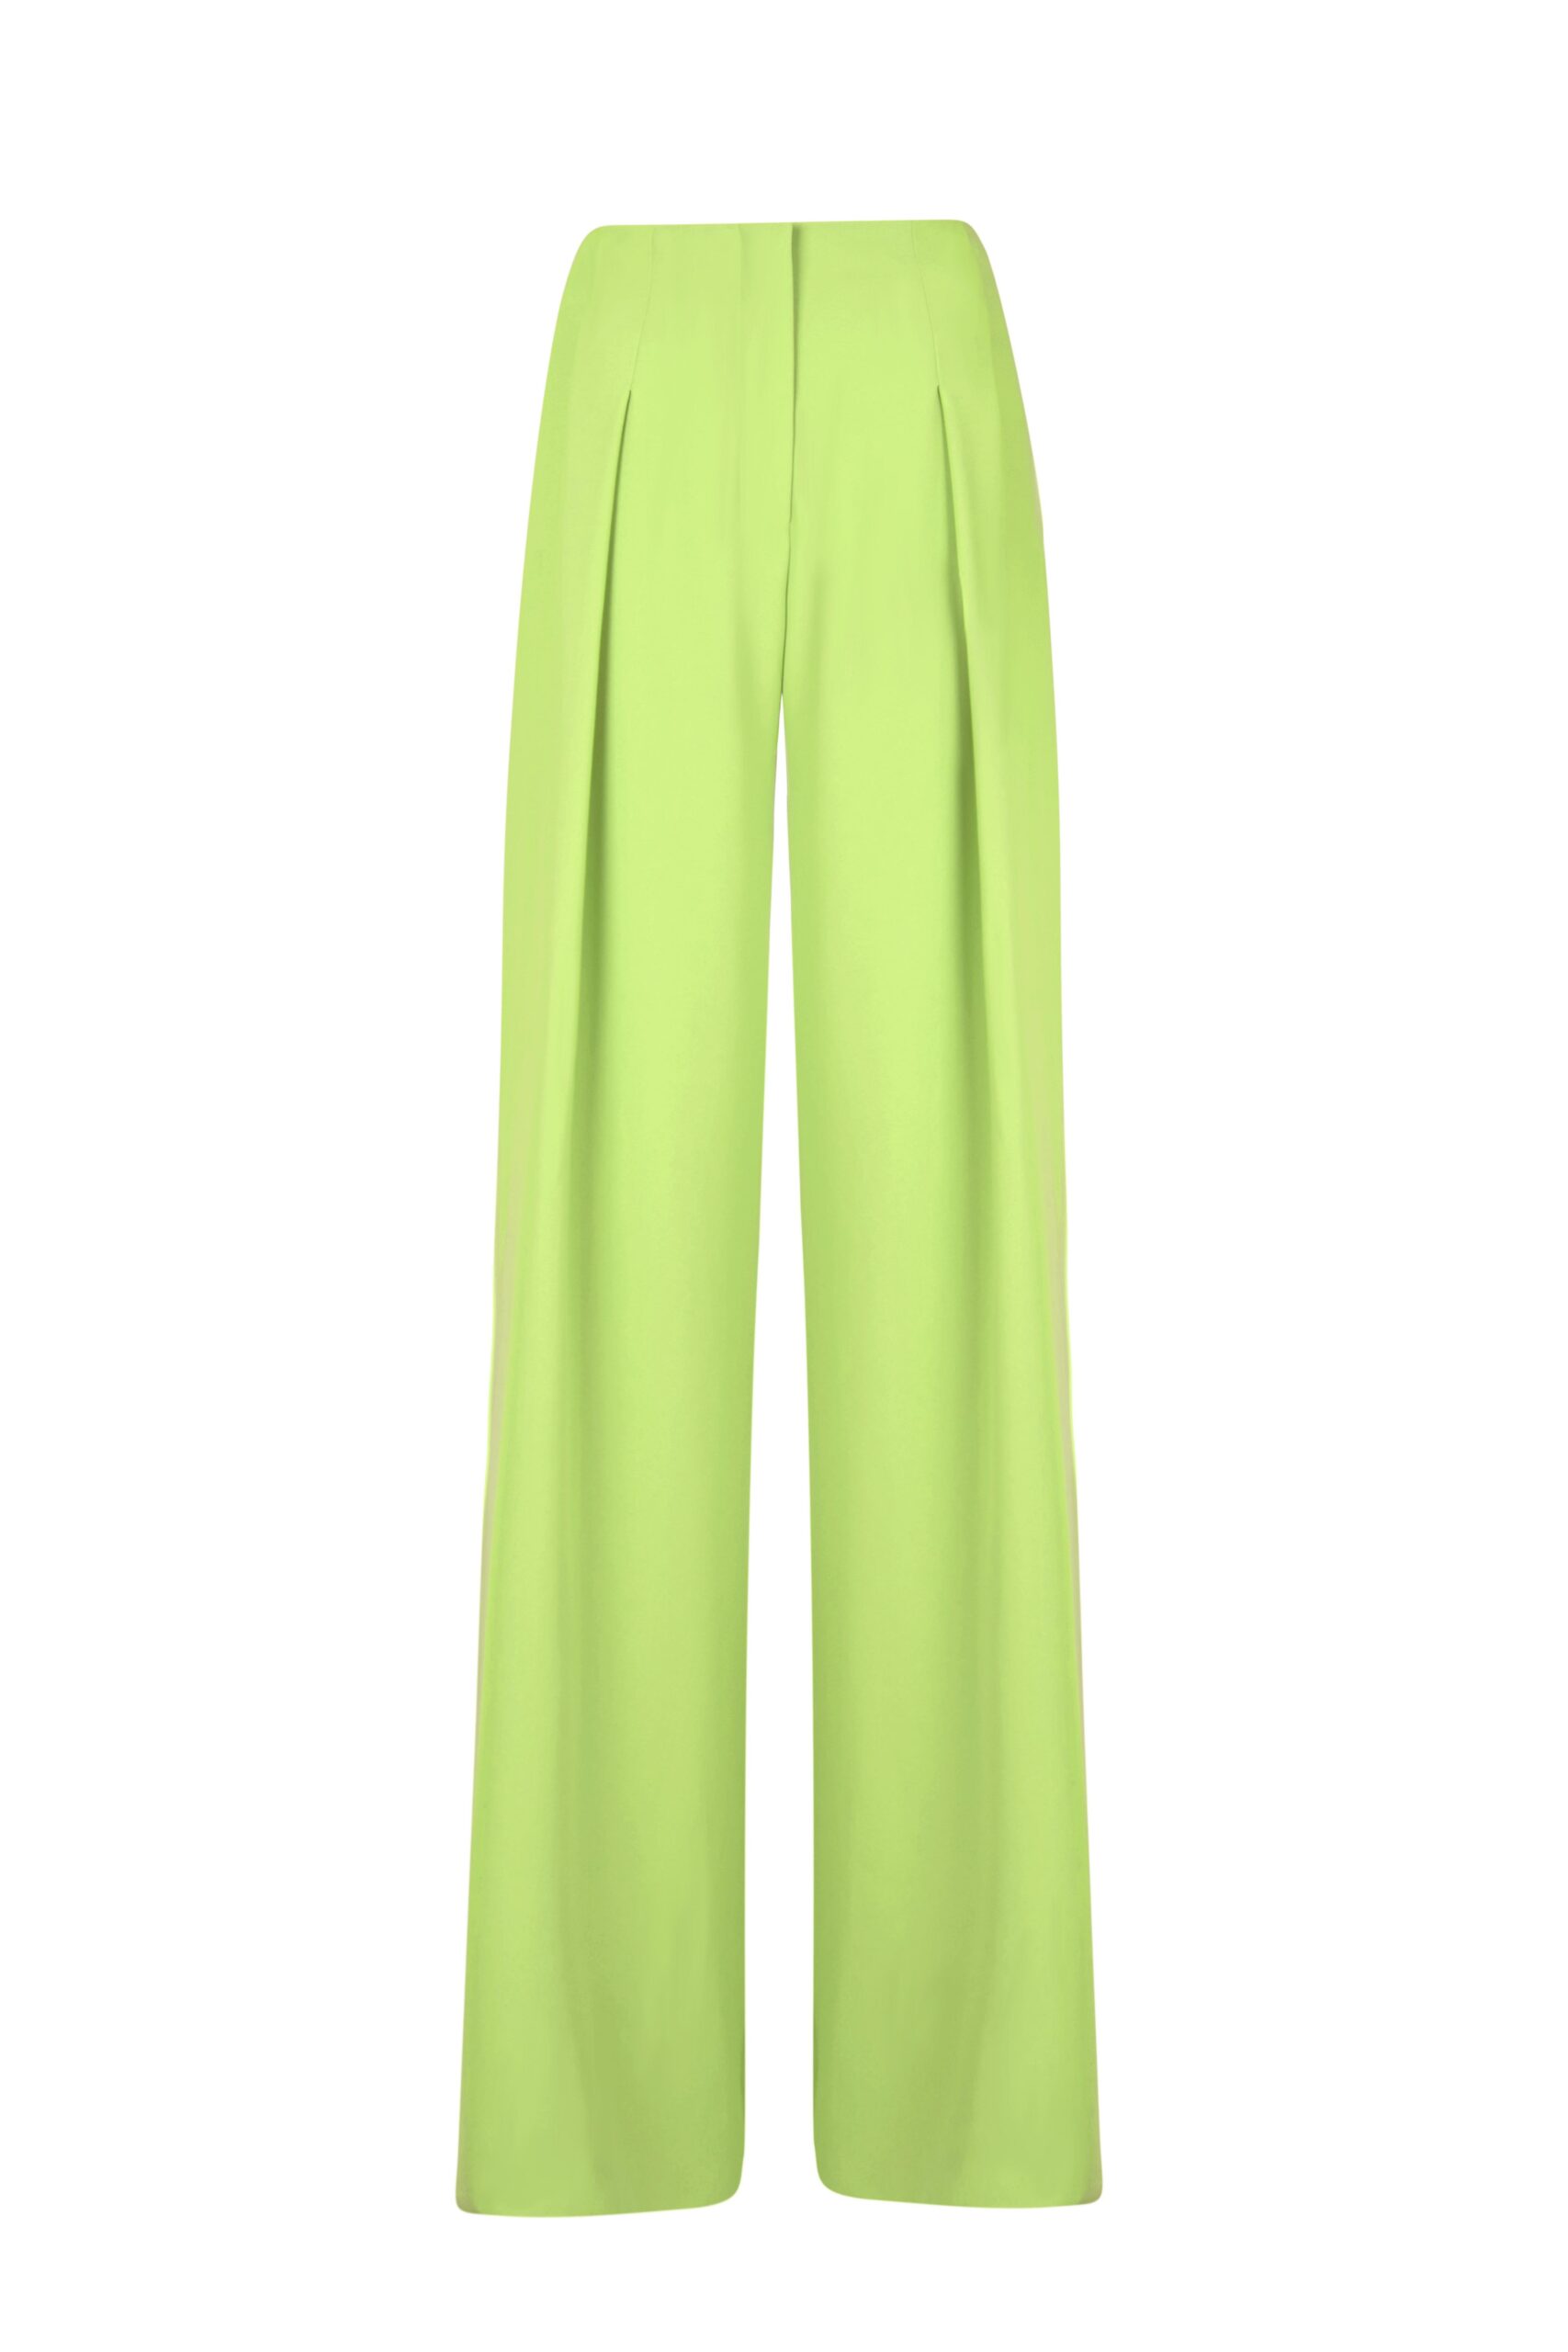 Lime Green High Rise Pleated Pants - F.ILKK